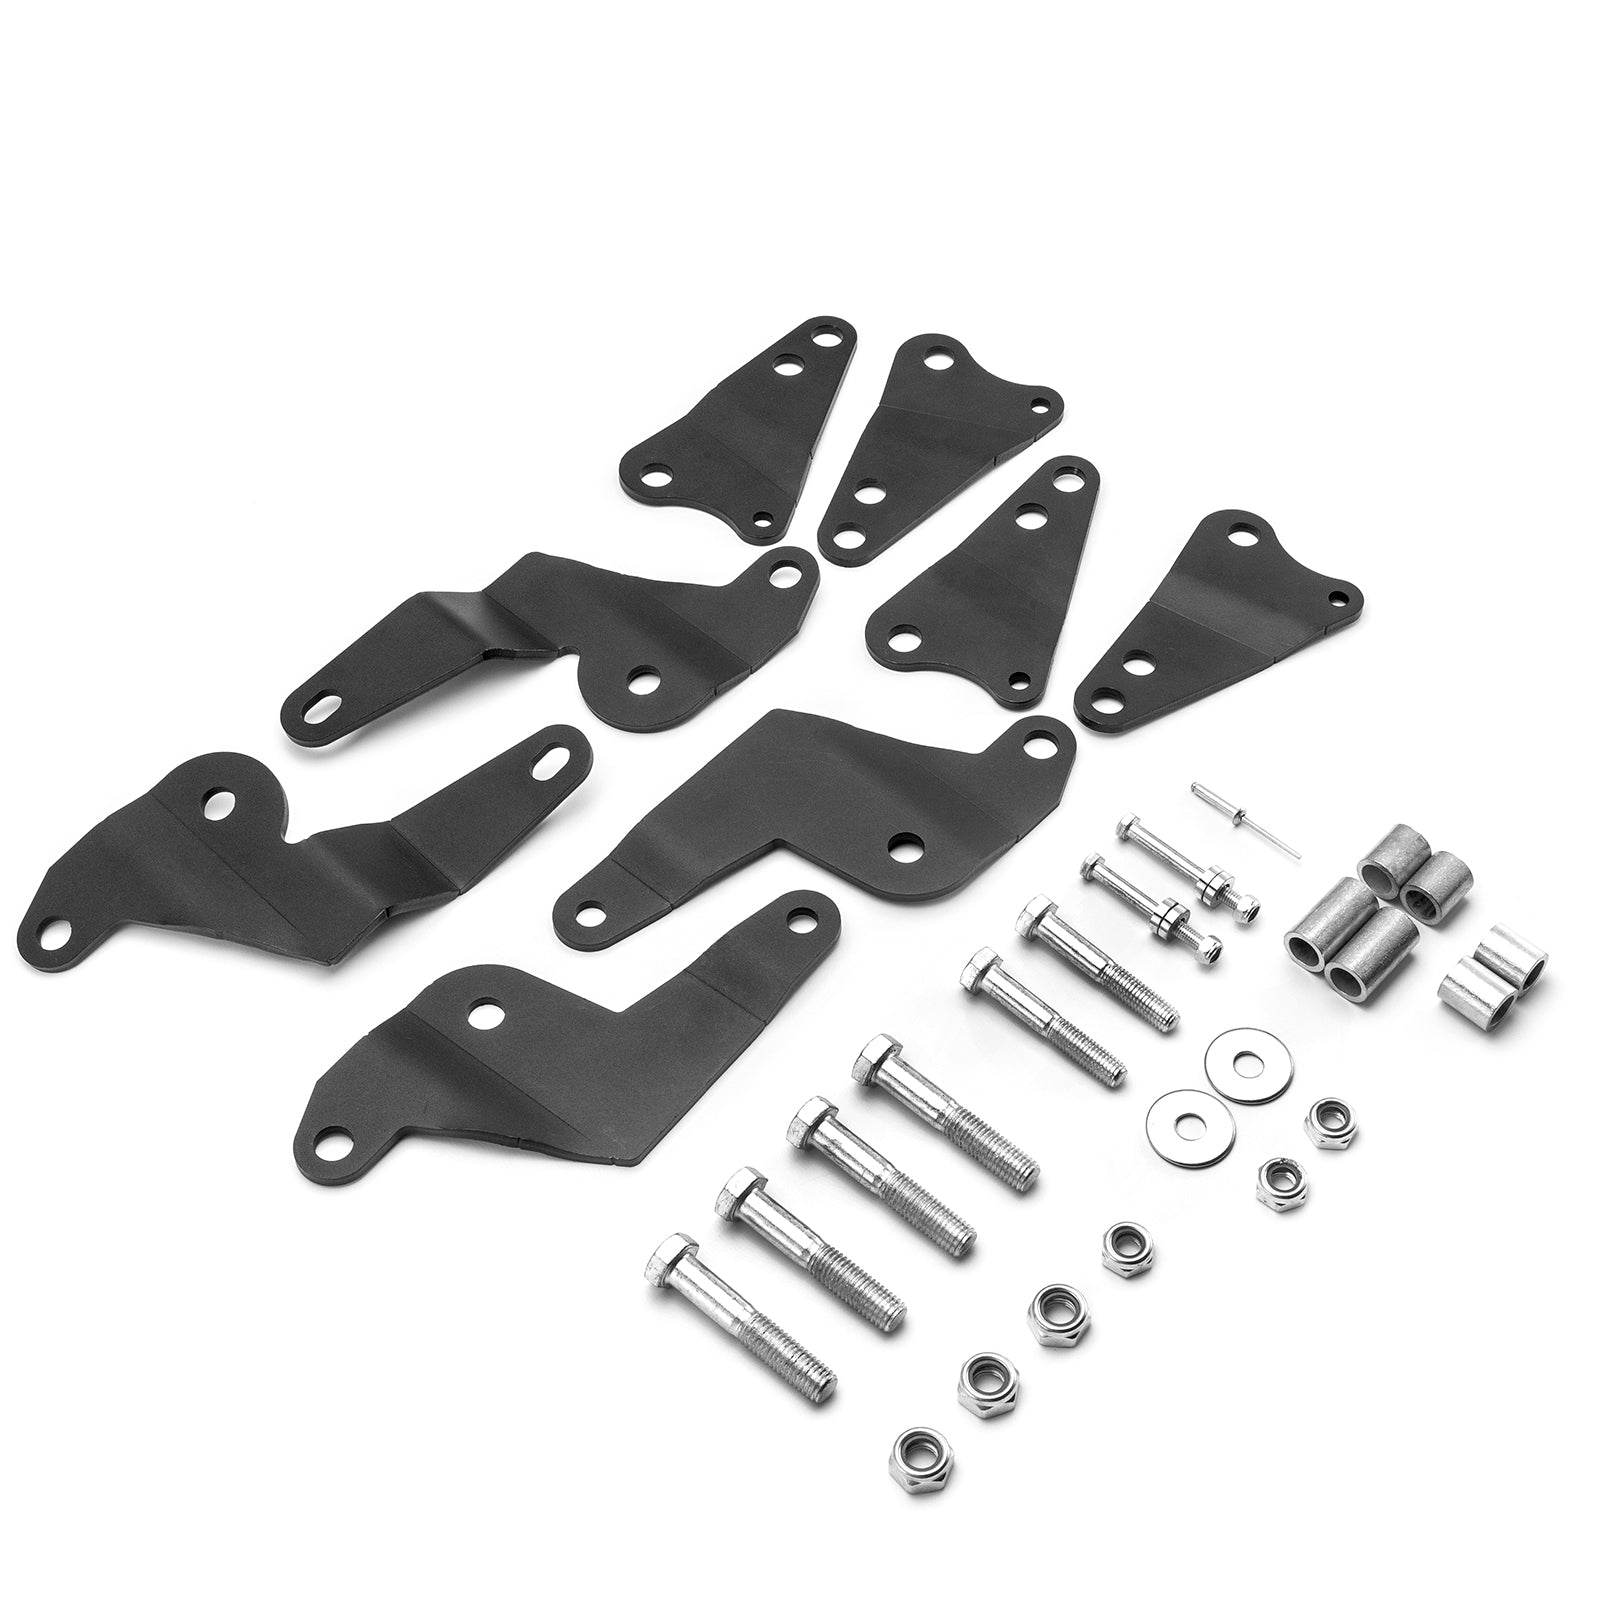 14-18 Can-Am Maverick Max 1000 Rise 3" Ground Clearance Suspension Lift Kit - Weisen